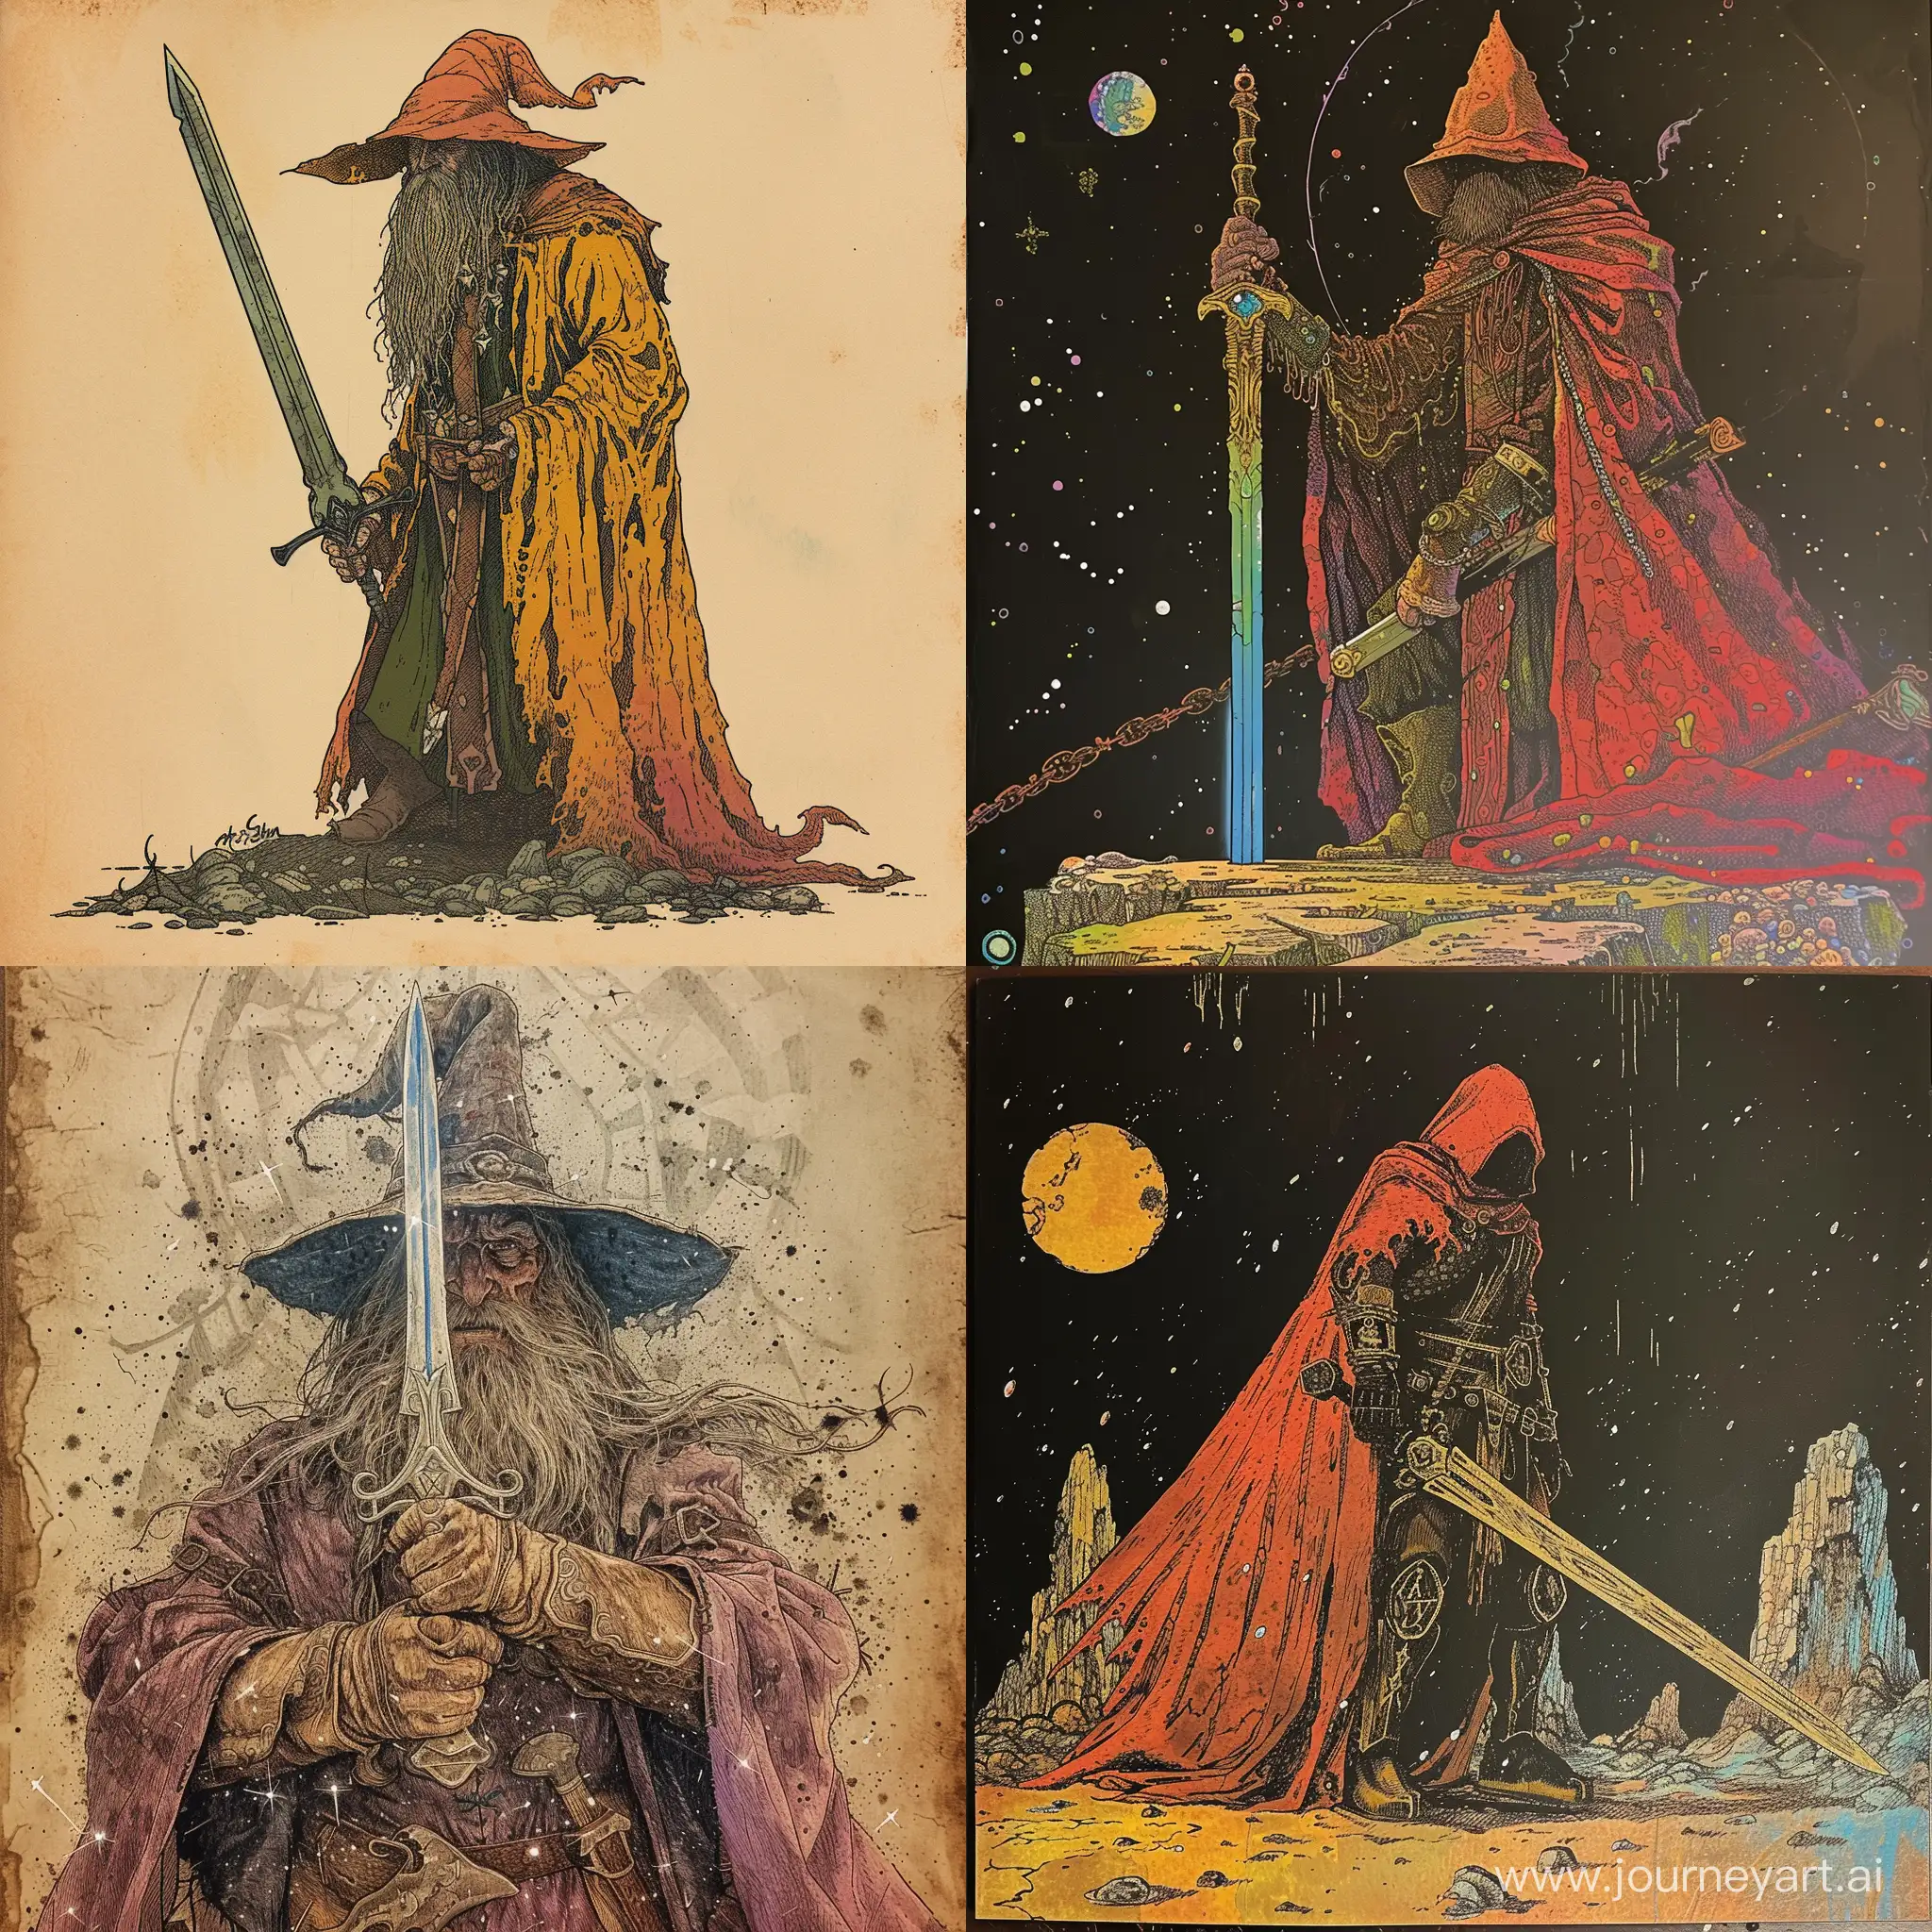 @Shaymoose: 1970’s dark fantasy book cover paper art dungeons and dragons style drawing of Sword wielding wizard